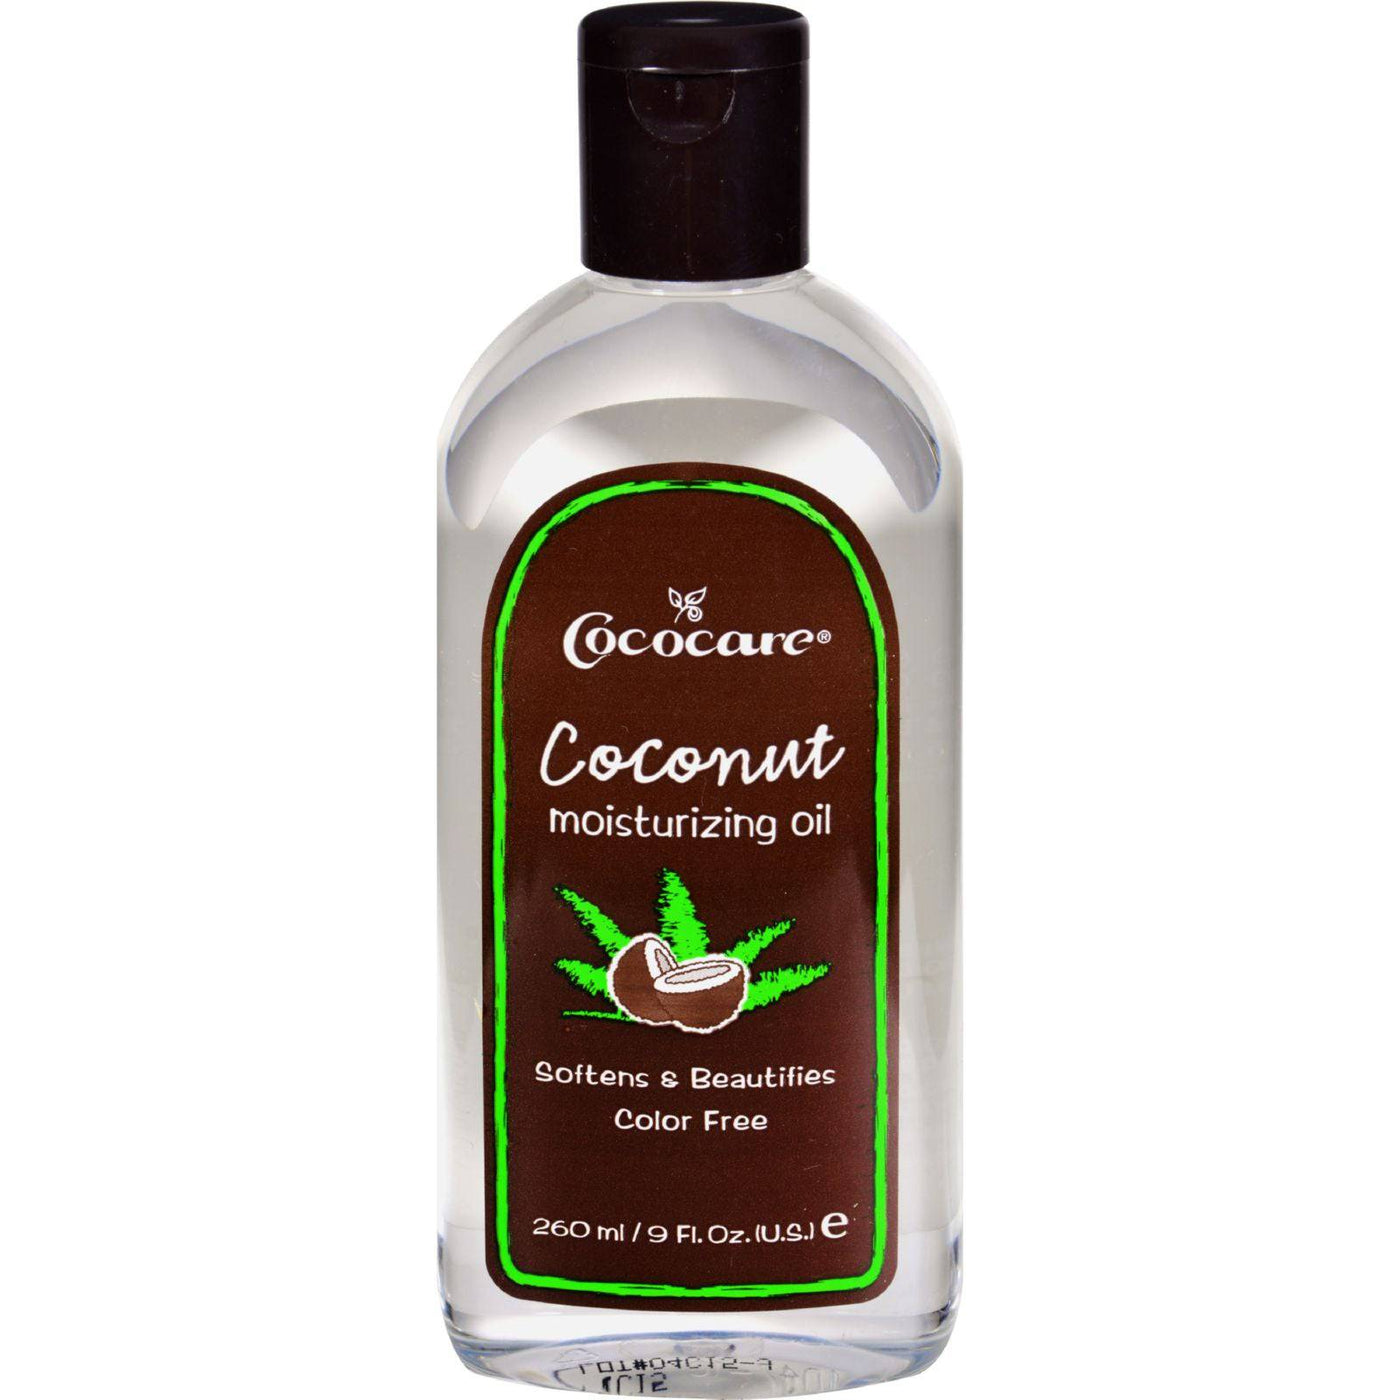 Buy Cococare Coconut Moisturizing Oil - 9 Fl Oz  at OnlyNaturals.us